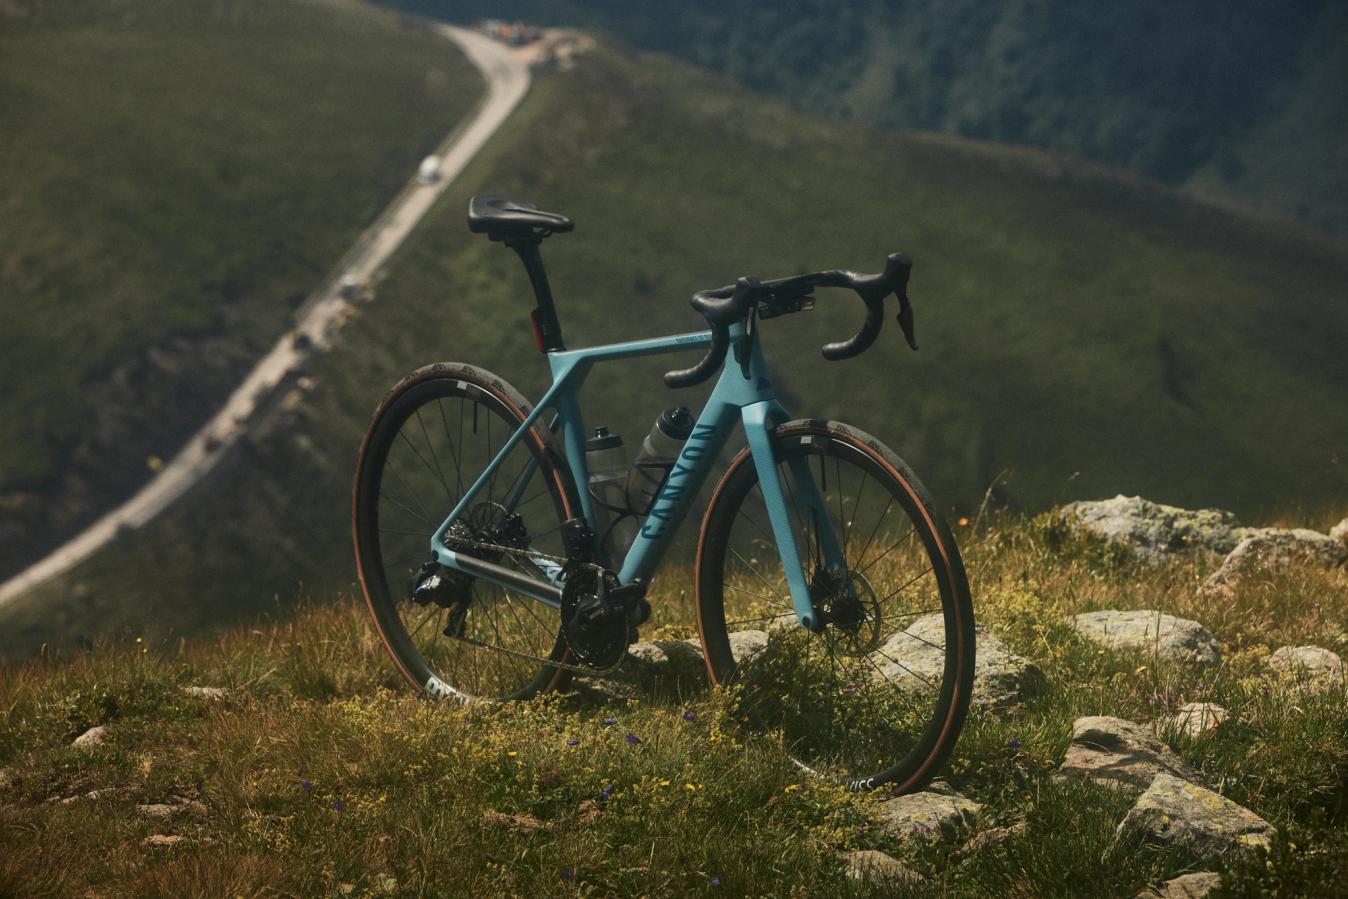 Canyon's 'all new' Endurace is claimed by Canyon to be the fastest endurance bike that it has made.